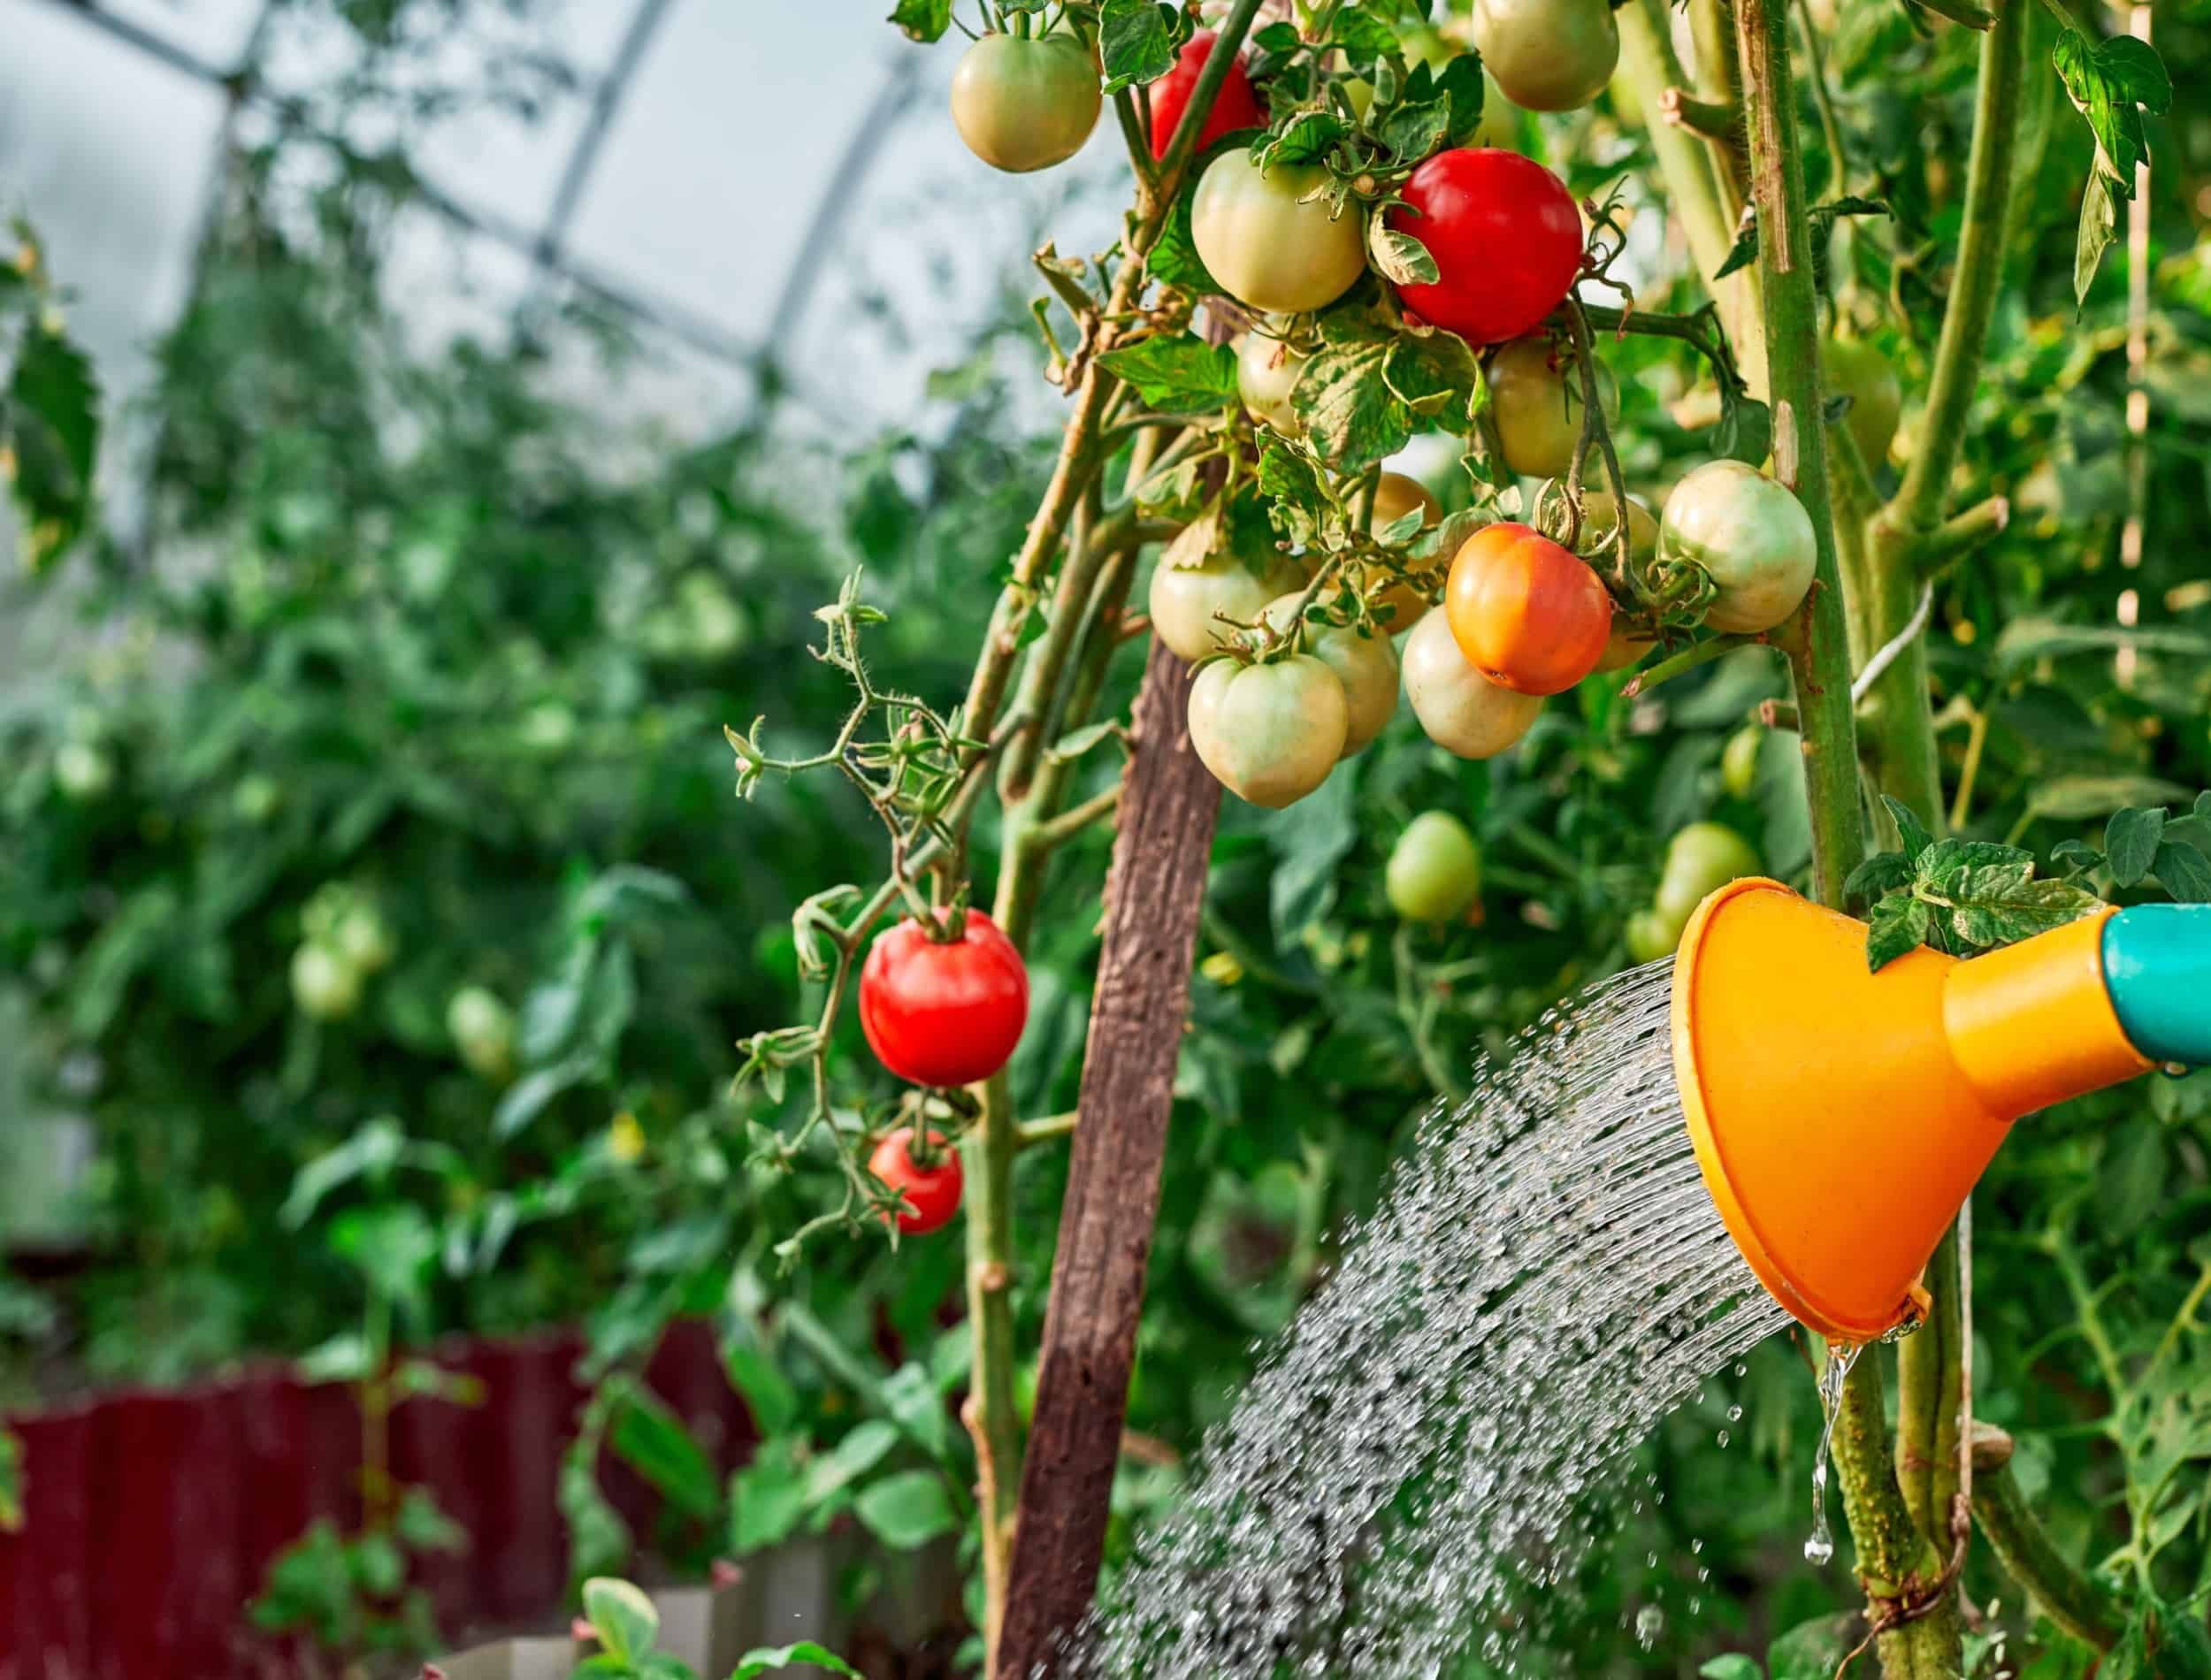 Watering tomatoes plant in greenhouse garden. Hand with watering can in greenhouse watering the tomato. Close up.